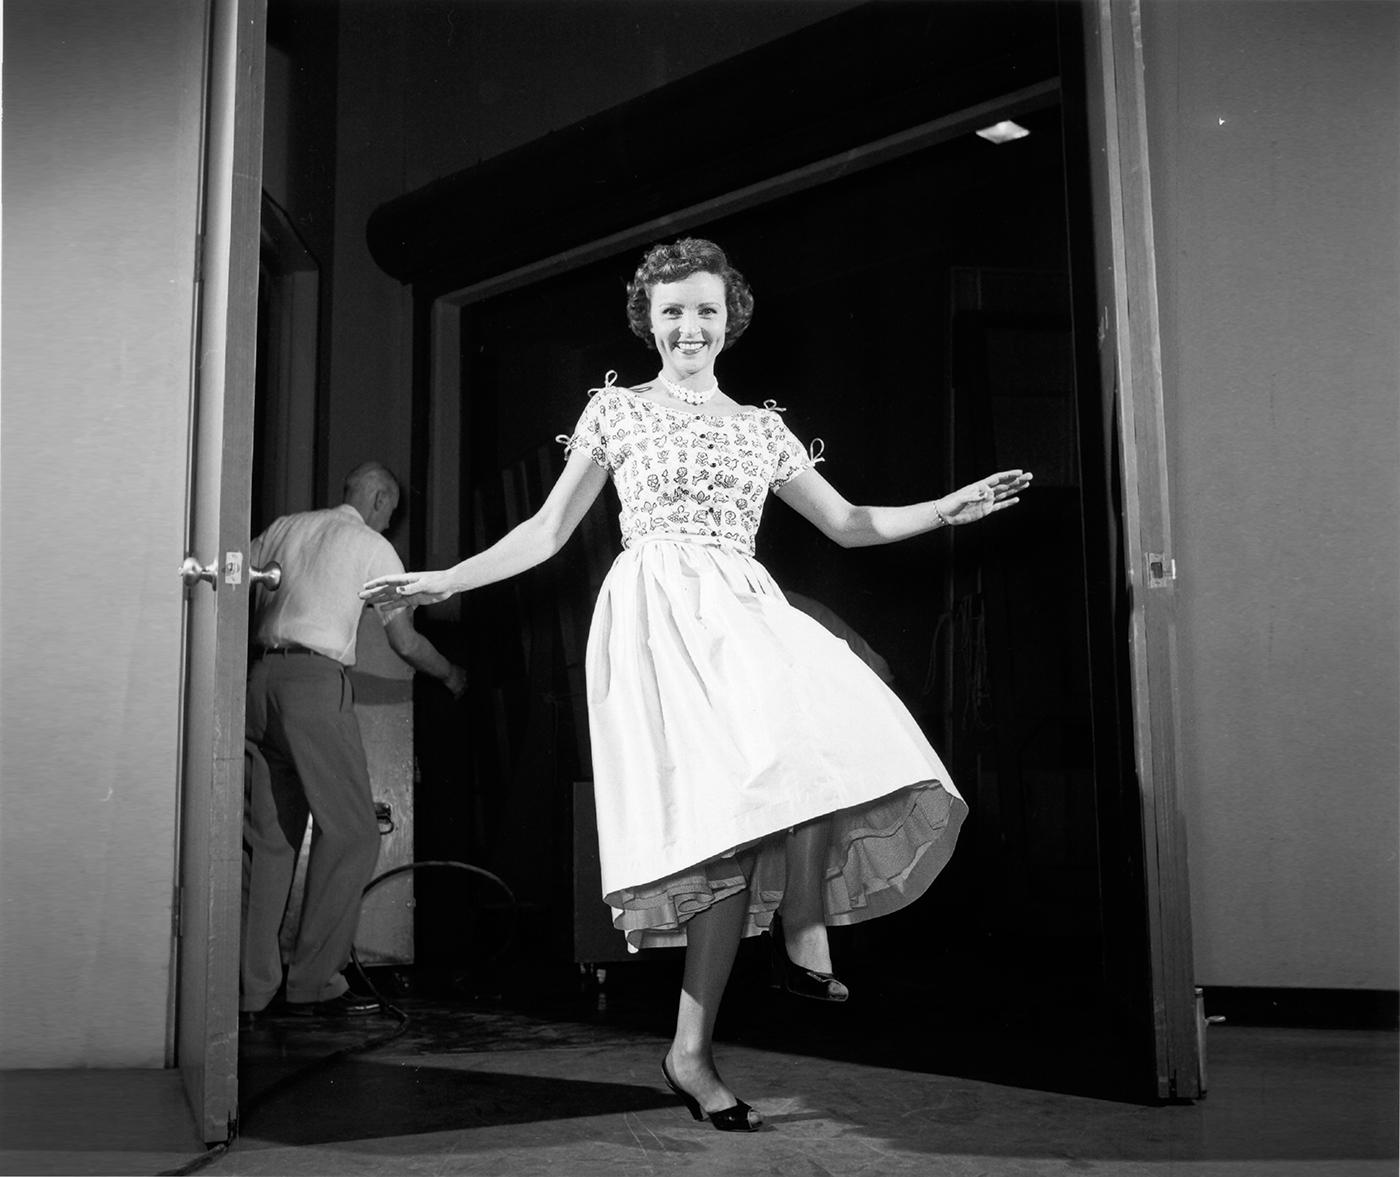 Betty White enjoying an off-camera moment on an early version of “The Betty White Show.” Photo: Pioneers of Television Archives